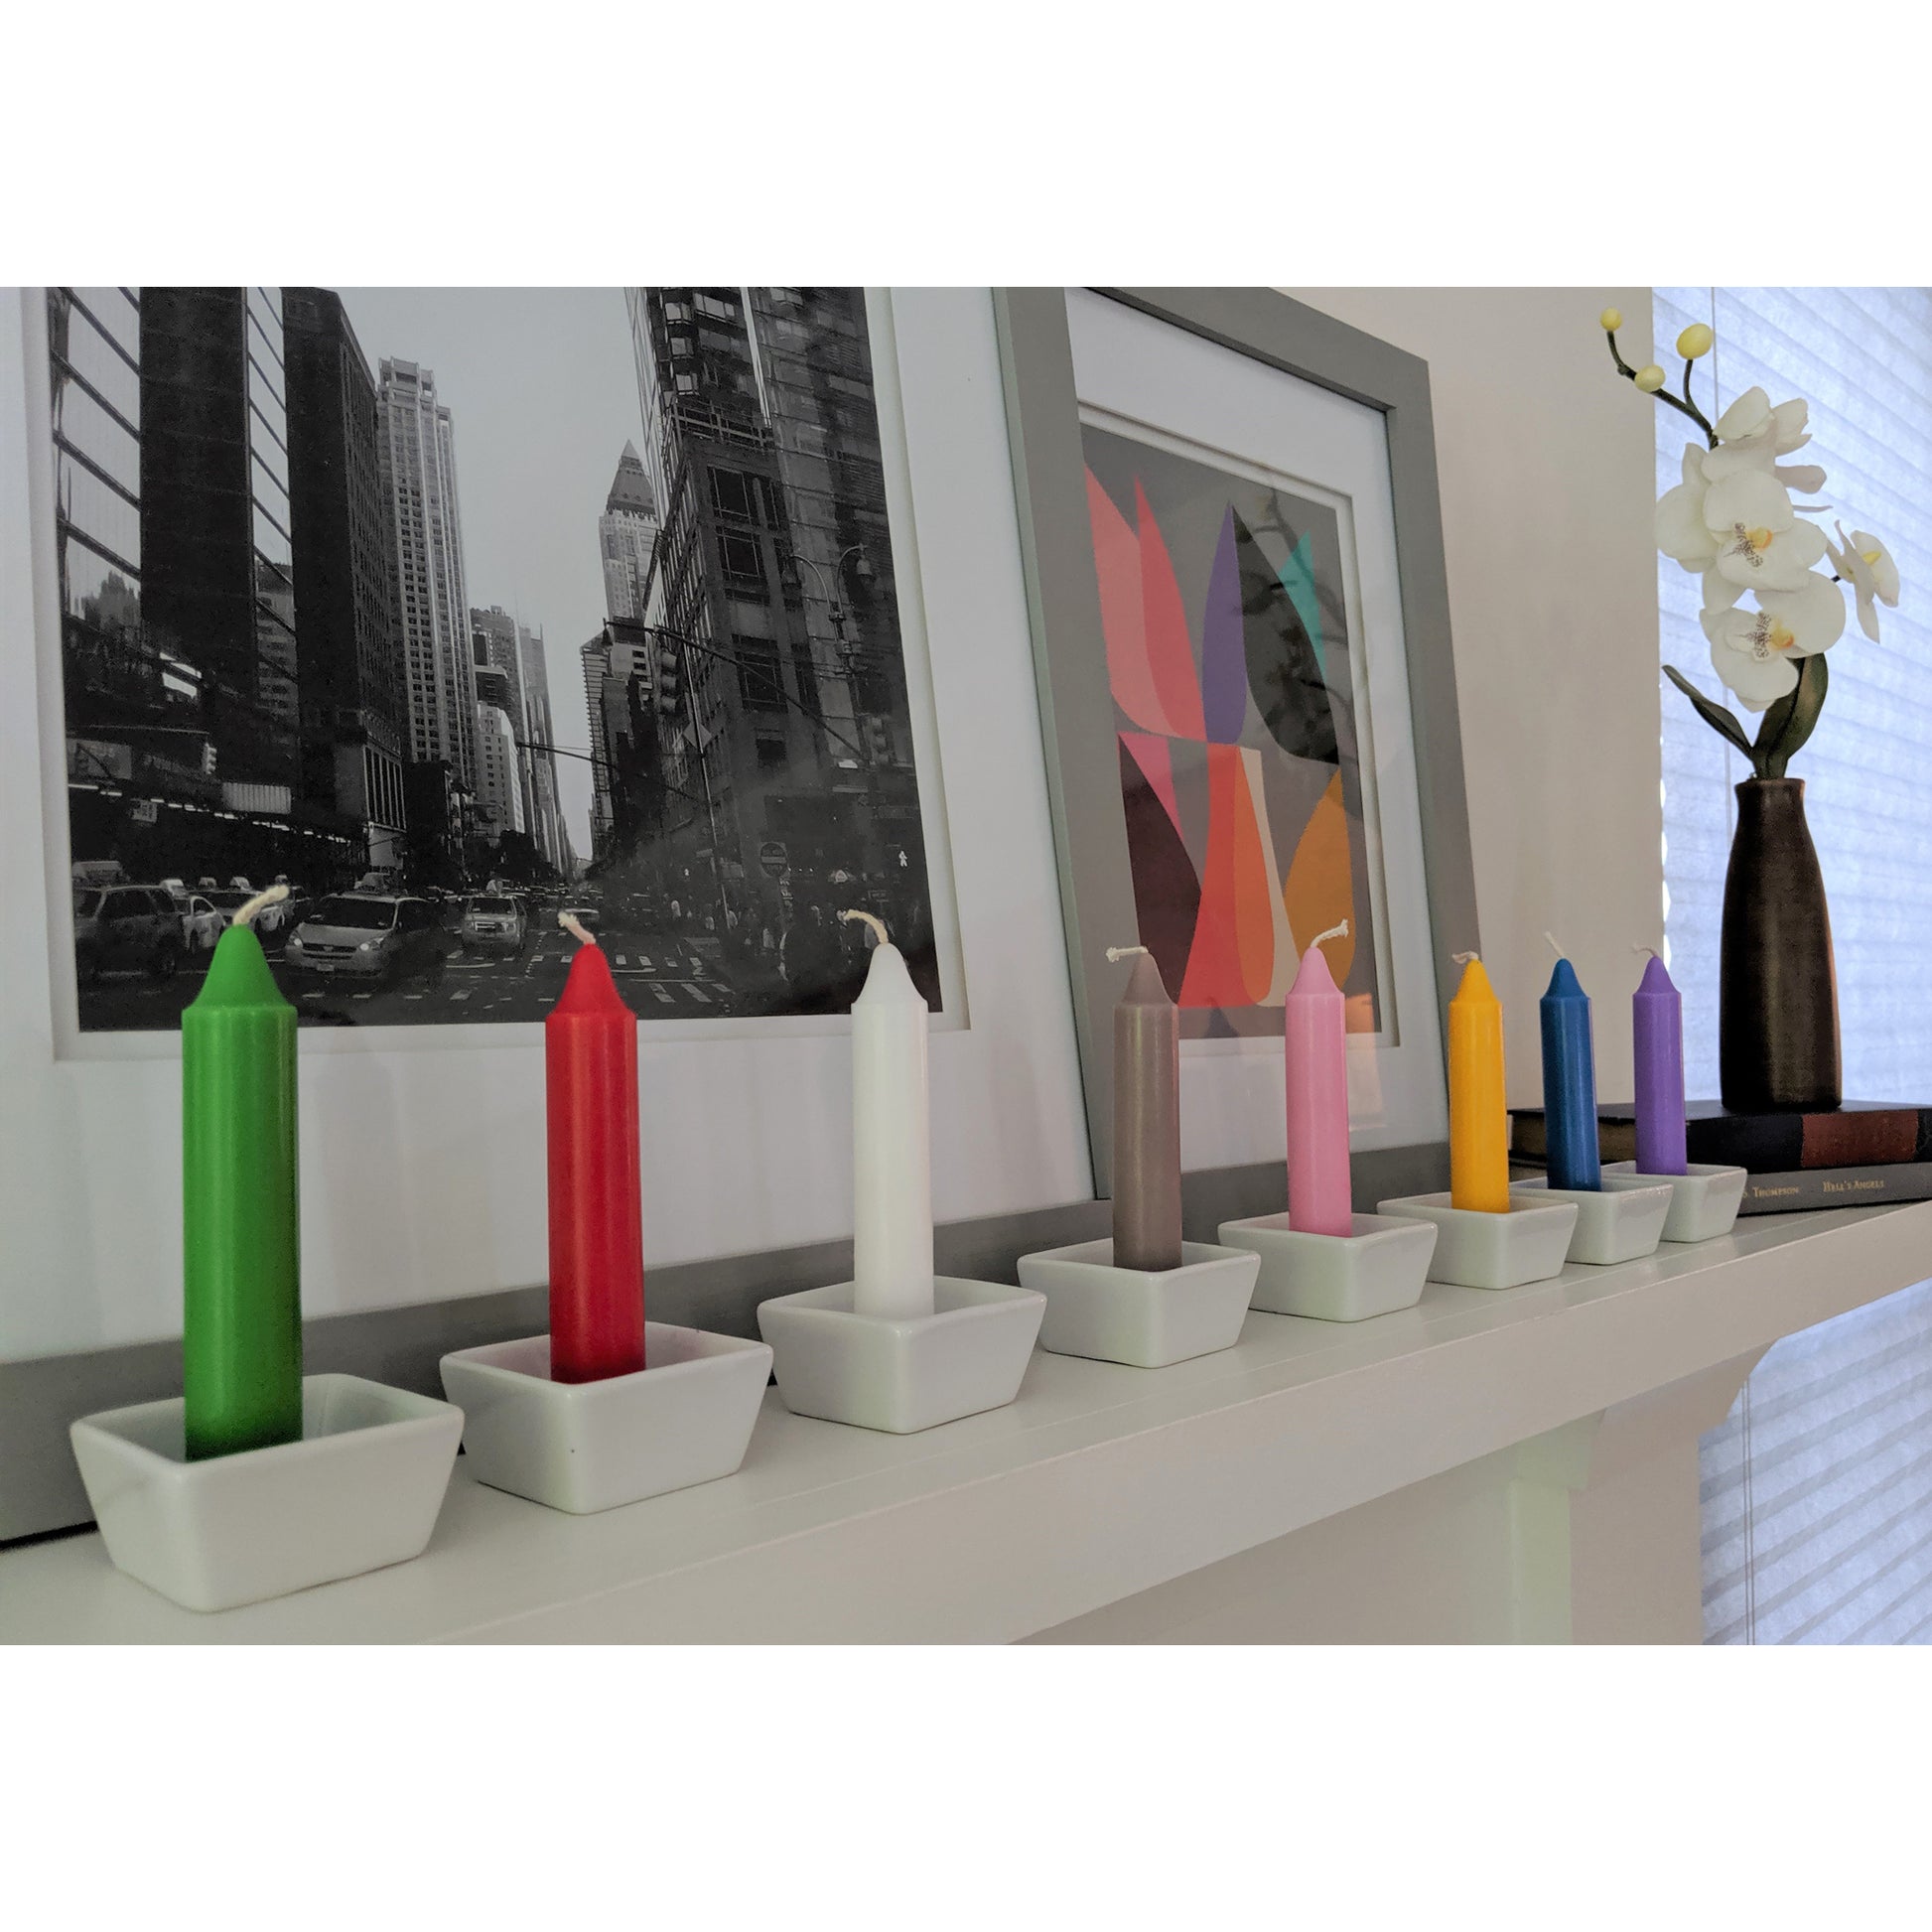 Image, angled view of multi colored candles displayed on mantle.